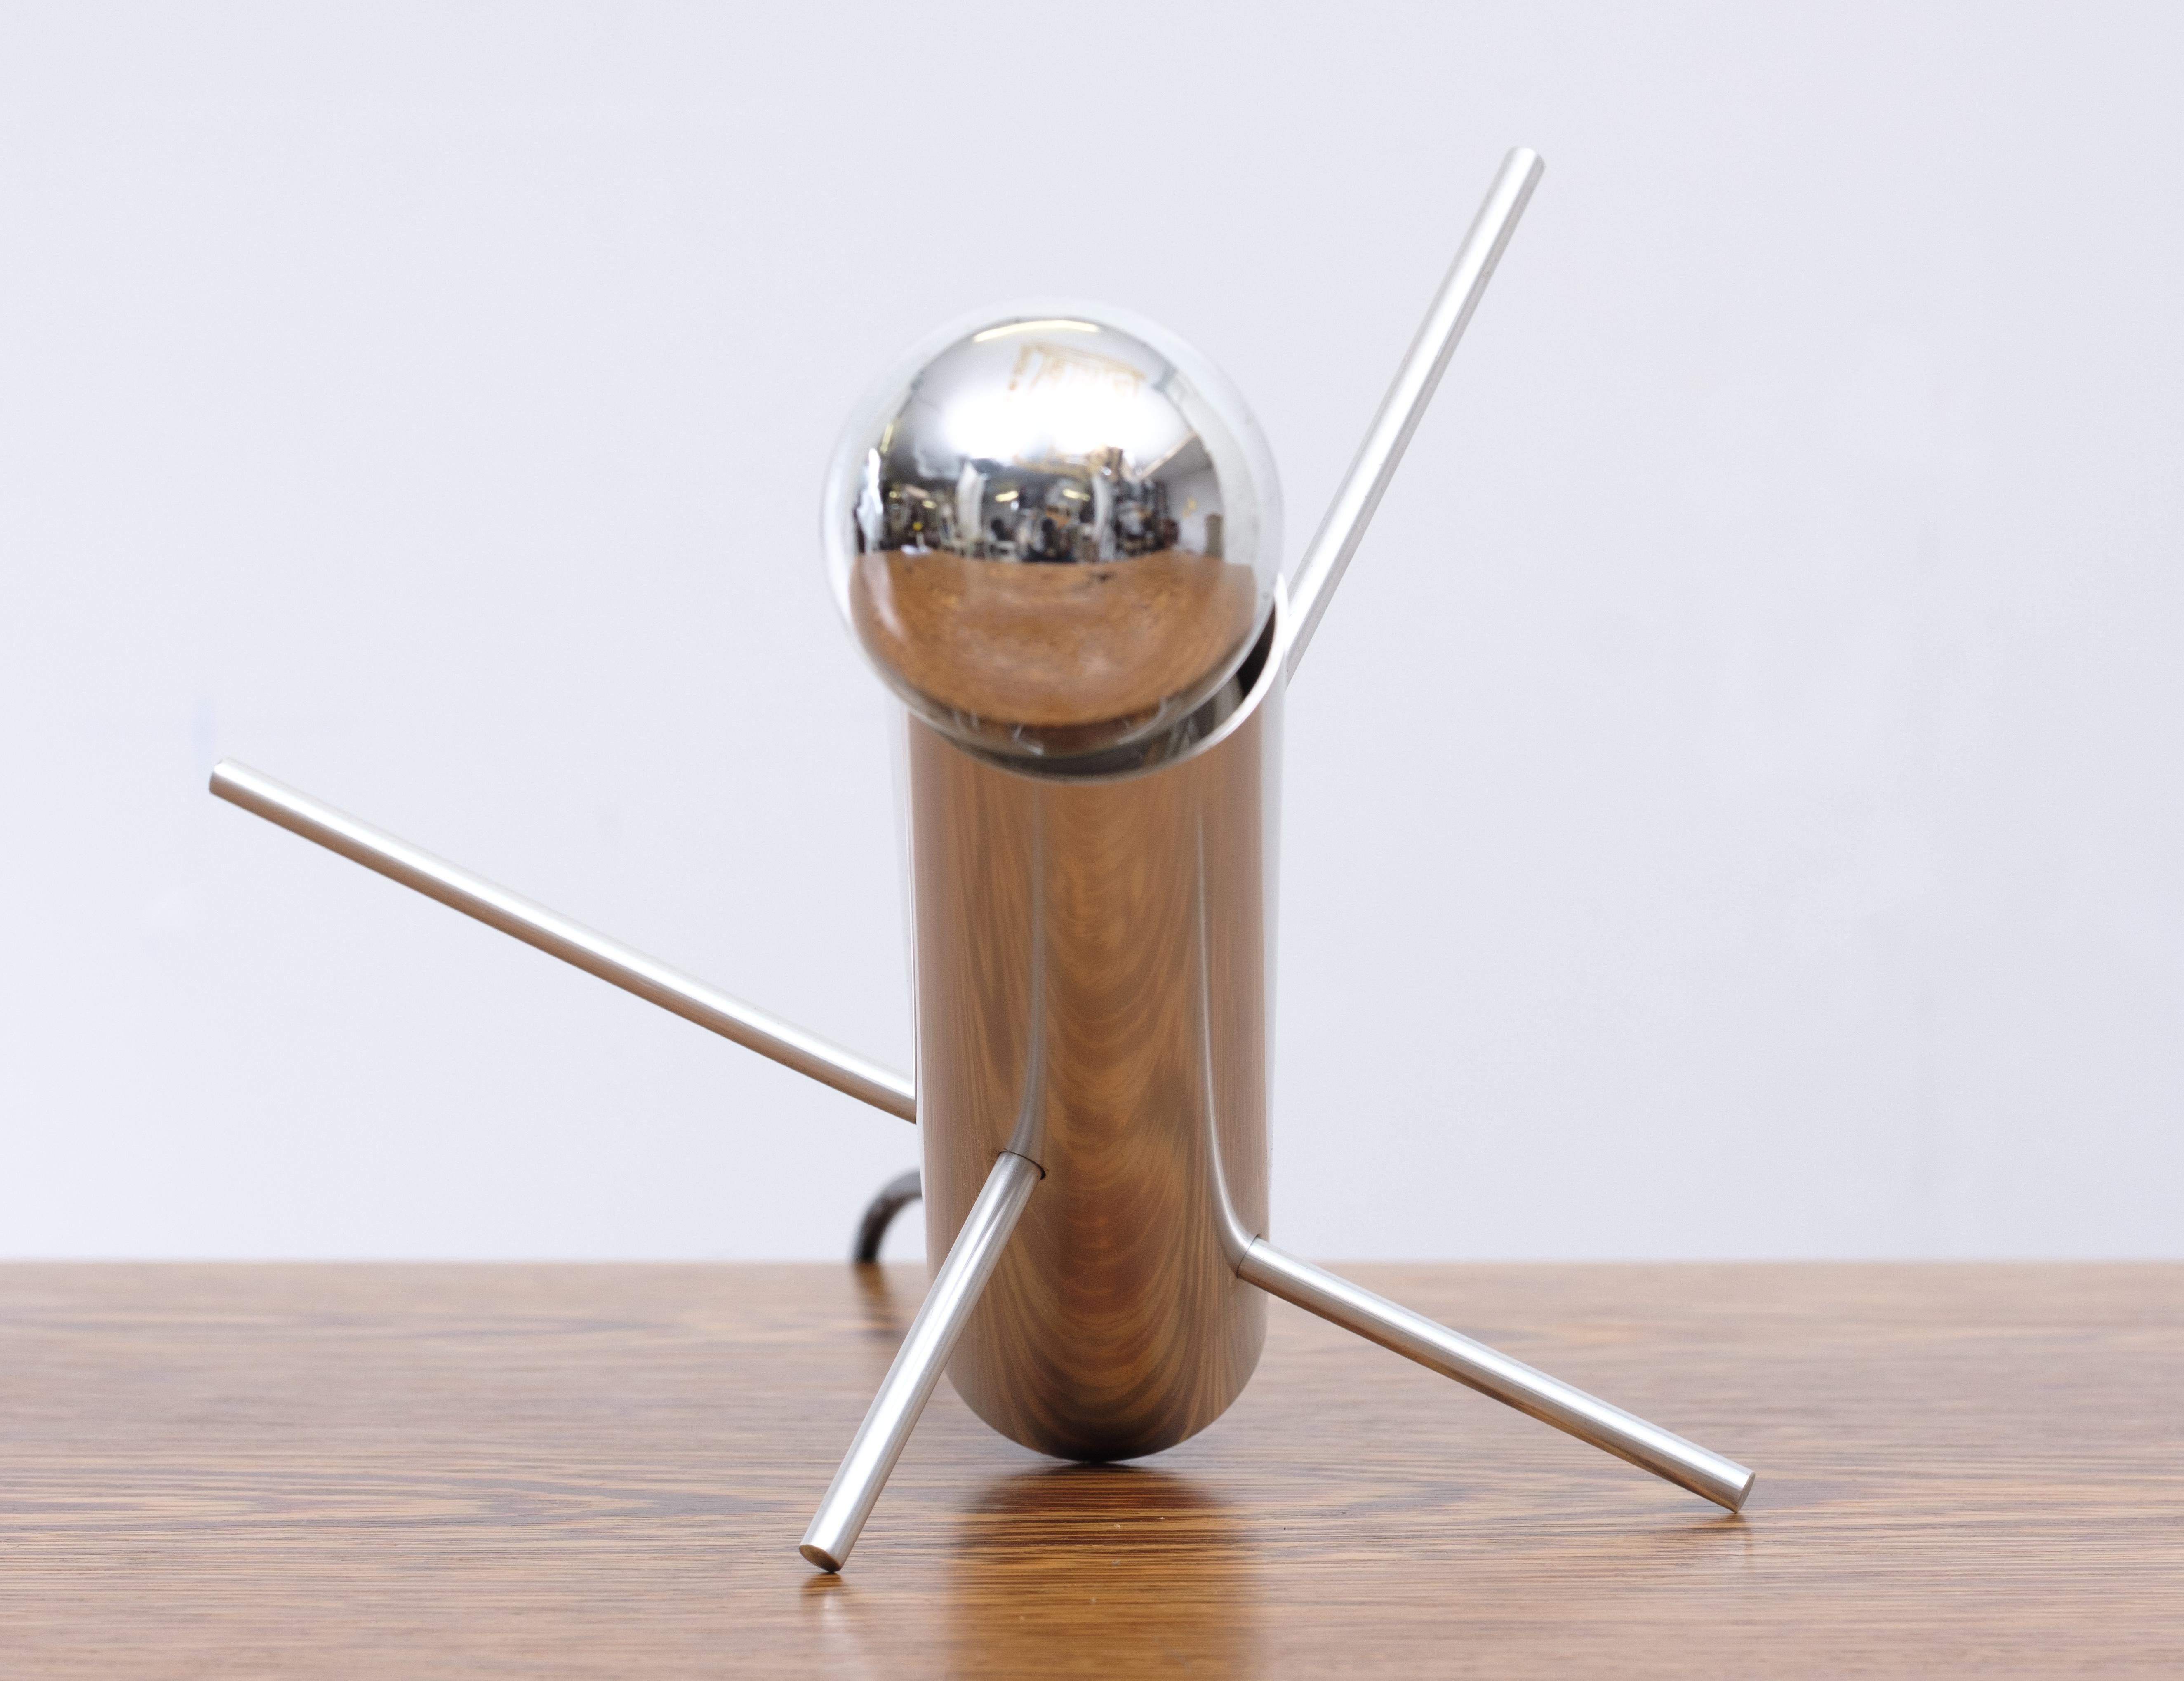 RAAK cricket lamp Model R-60 by Otto Wasch for RAAK, designed in 1962. A rod, two pens, a lamp, could it be simpler? You can adjust the lamp in any desired position by sliding the pins. Manufactured in the Netherlands. Aluminum.